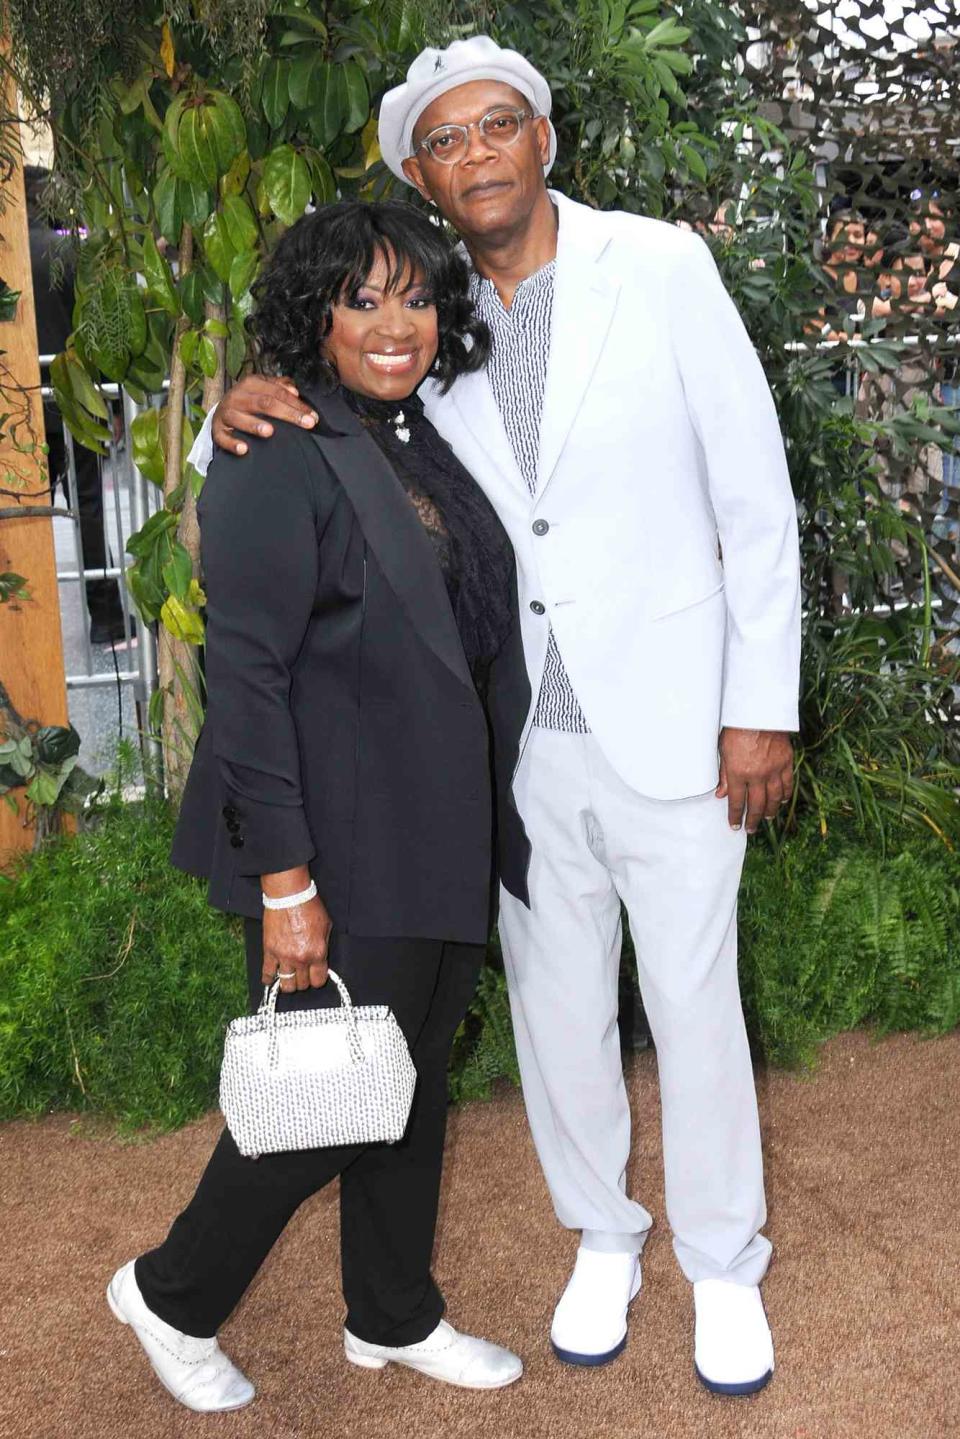 Samuel L. Jackson (R) and wife LaTanya Richardson (L) attend the premiere of Warner Bros. Pictures' 'The Legend Of Tarzan' at TCL Chinese Theatre on June 27, 2016 in Hollywood, California